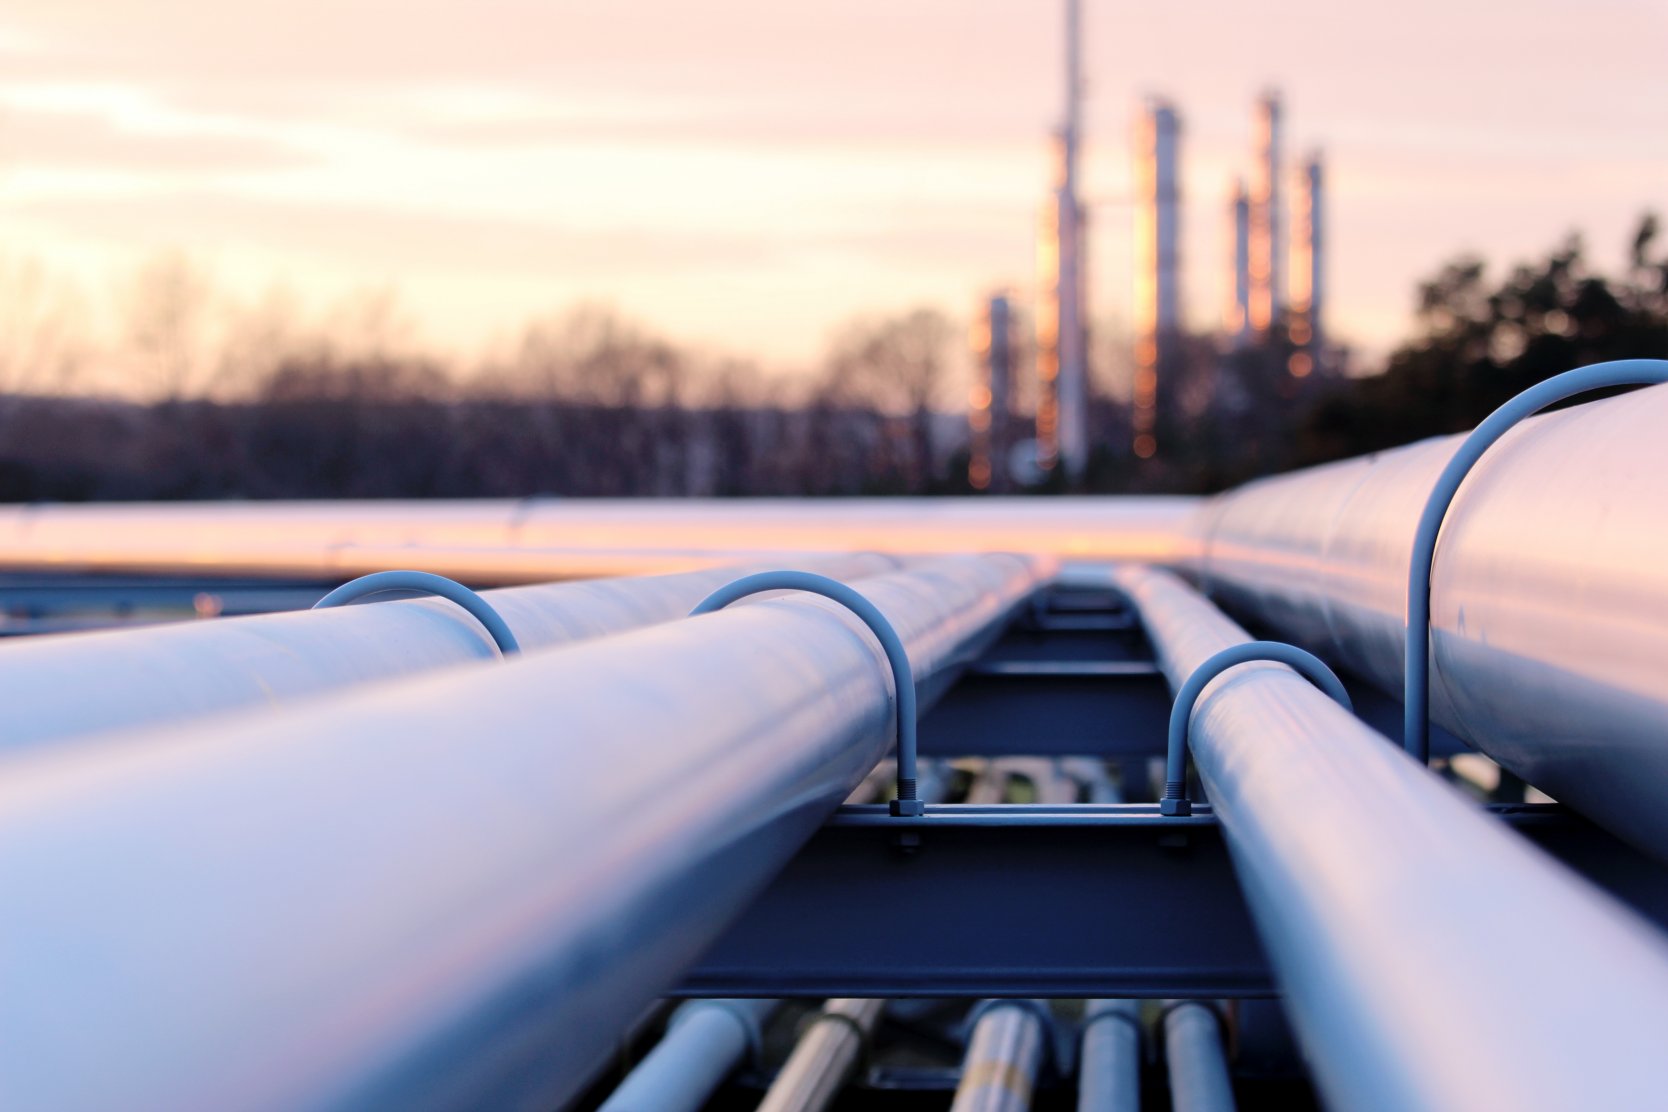 TC-Energy-sells-40-Stake-in-Columbia-Gas-Pipeline-Systems-for-3-9-Billion-to-GIP